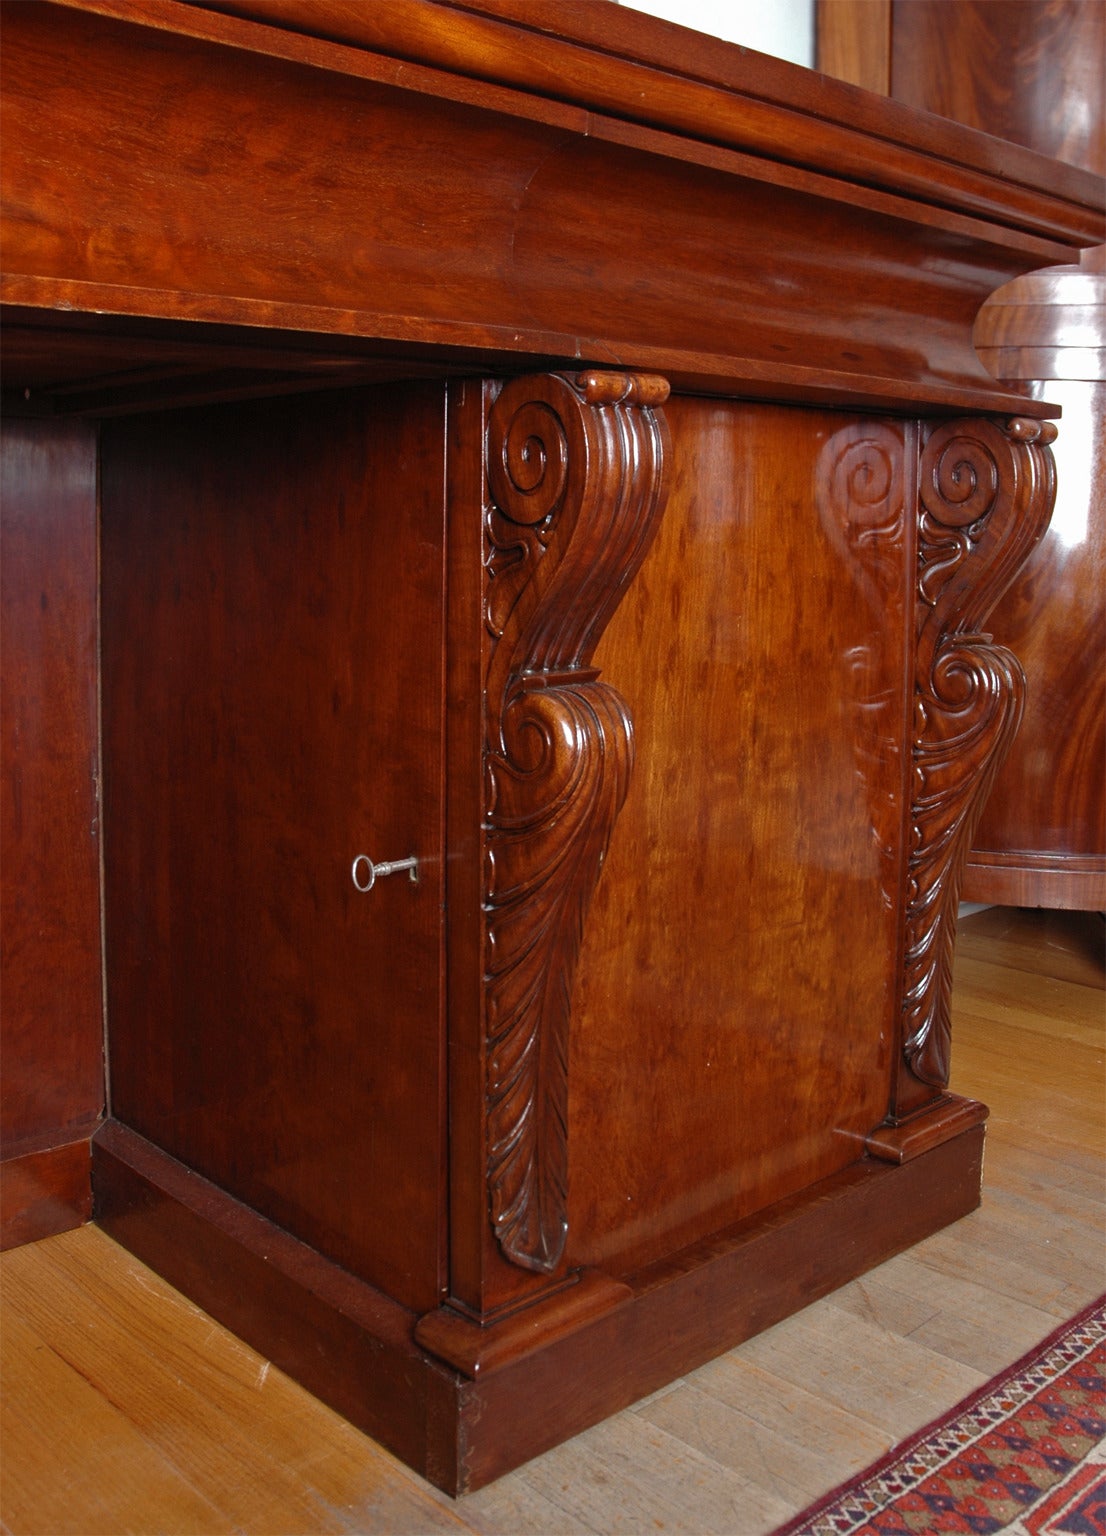 A very fine and unusually long Charles X sideboard with beautifully carved volutes decorated with acanthus leaves flanking each of two cabinet doors, below three concave drawers. Back-splash is embellished with carved crown of laurel leaves. Solid